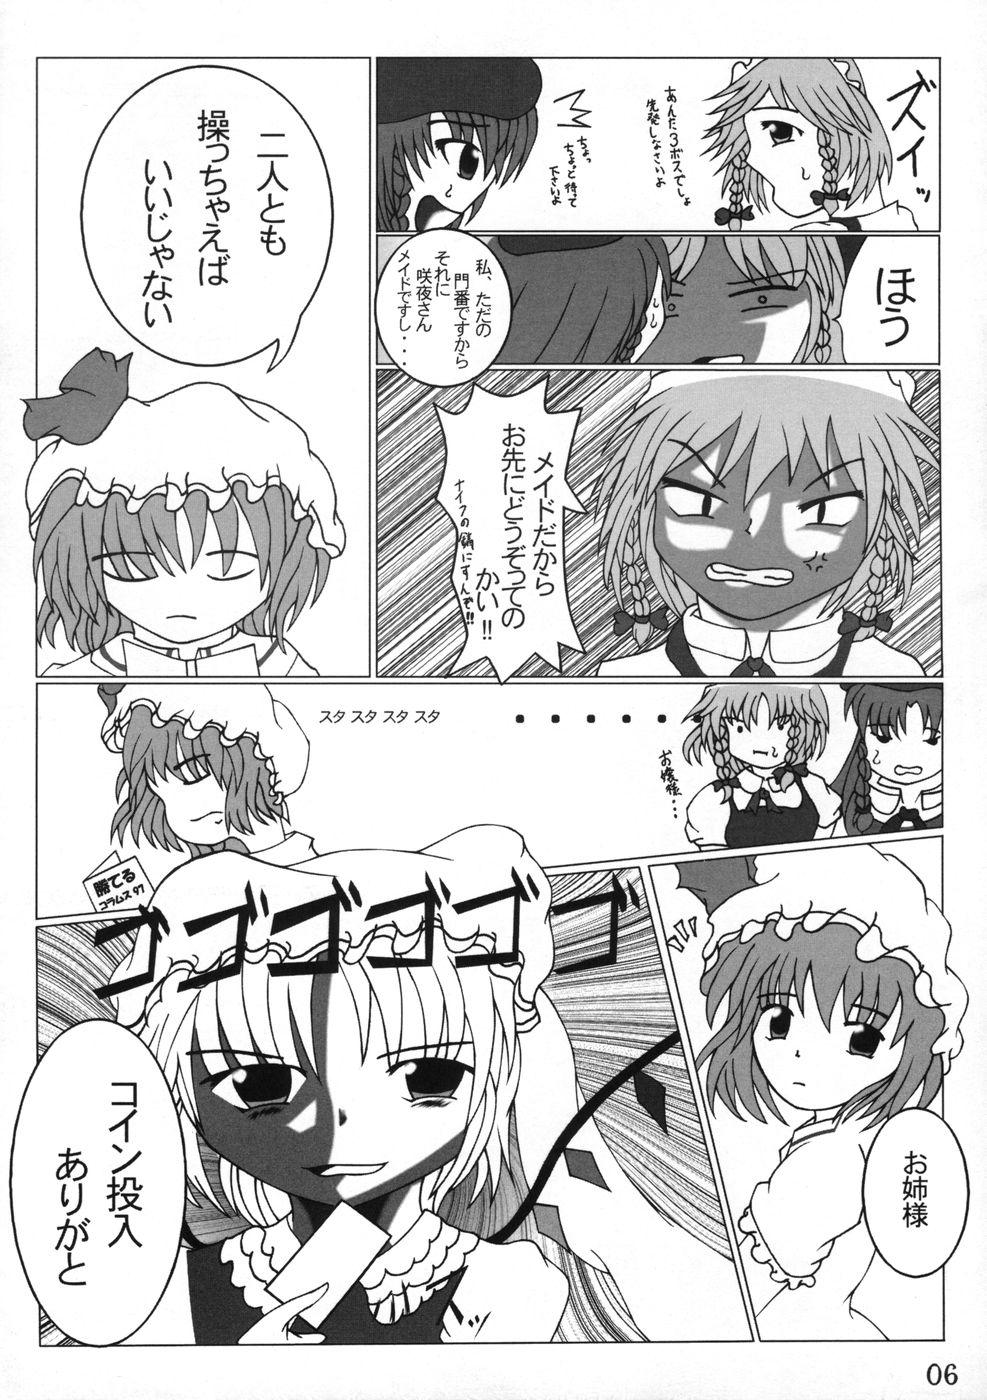 Flagra 業創りし風 - Touhou project Lolicon - Page 6